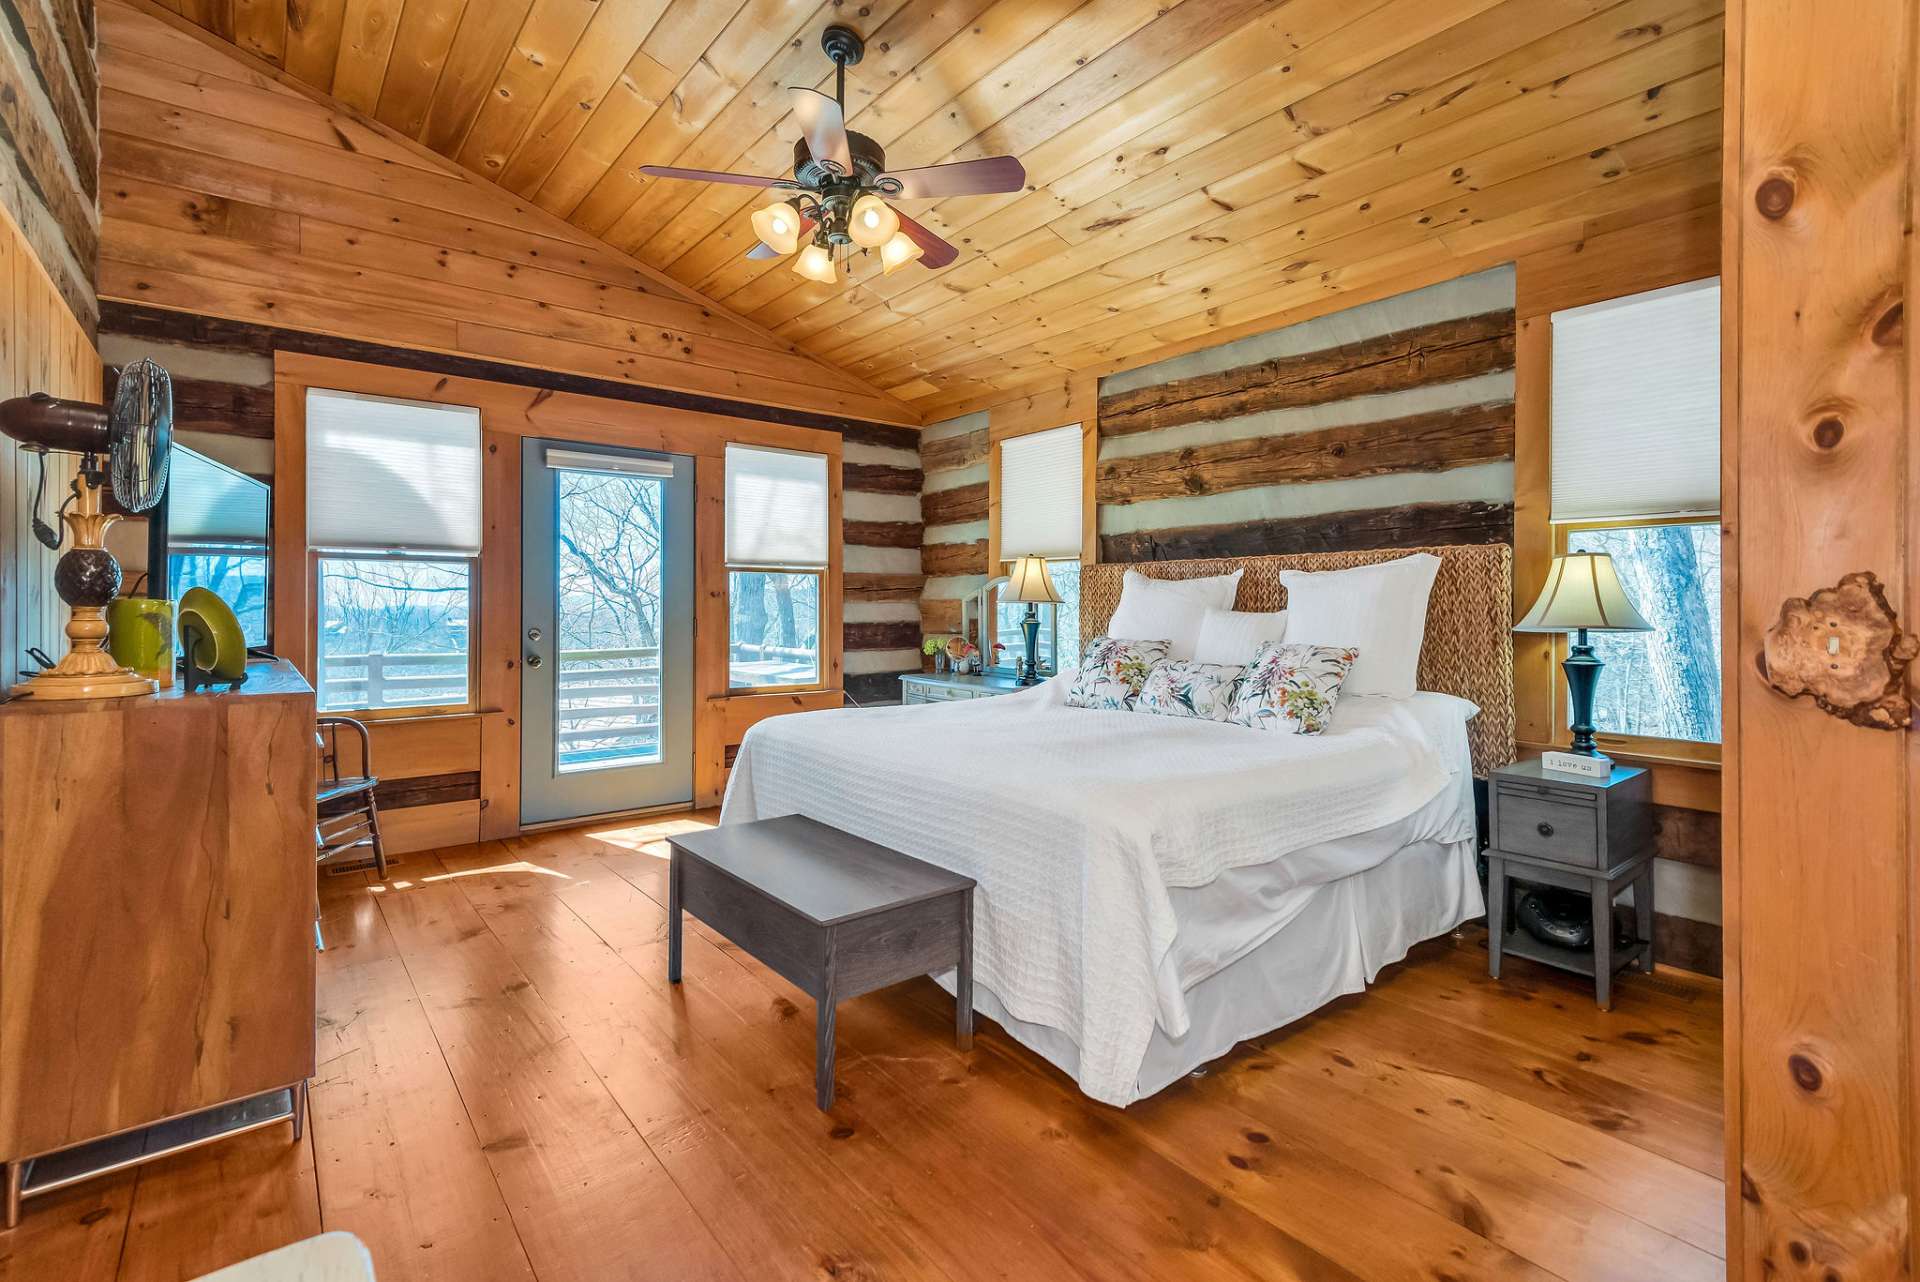 The main level primary suite has direct access to the open deck with ample windows allowing the natural light to radiate through your sanctuary.